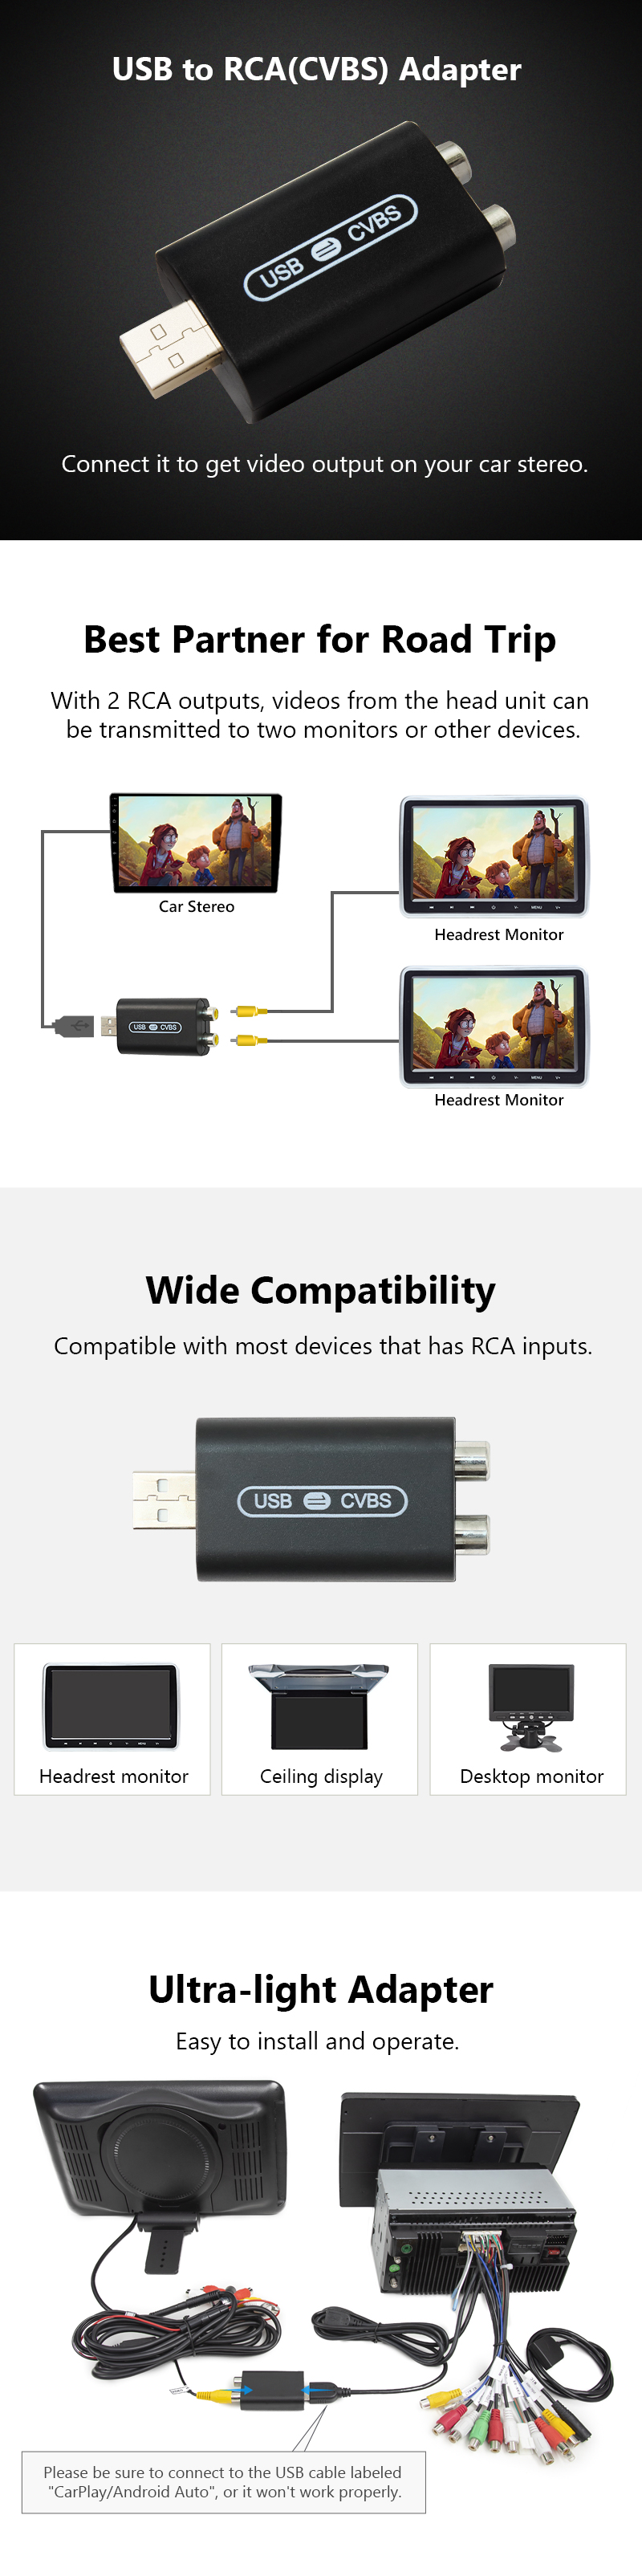 Video Output Adapter